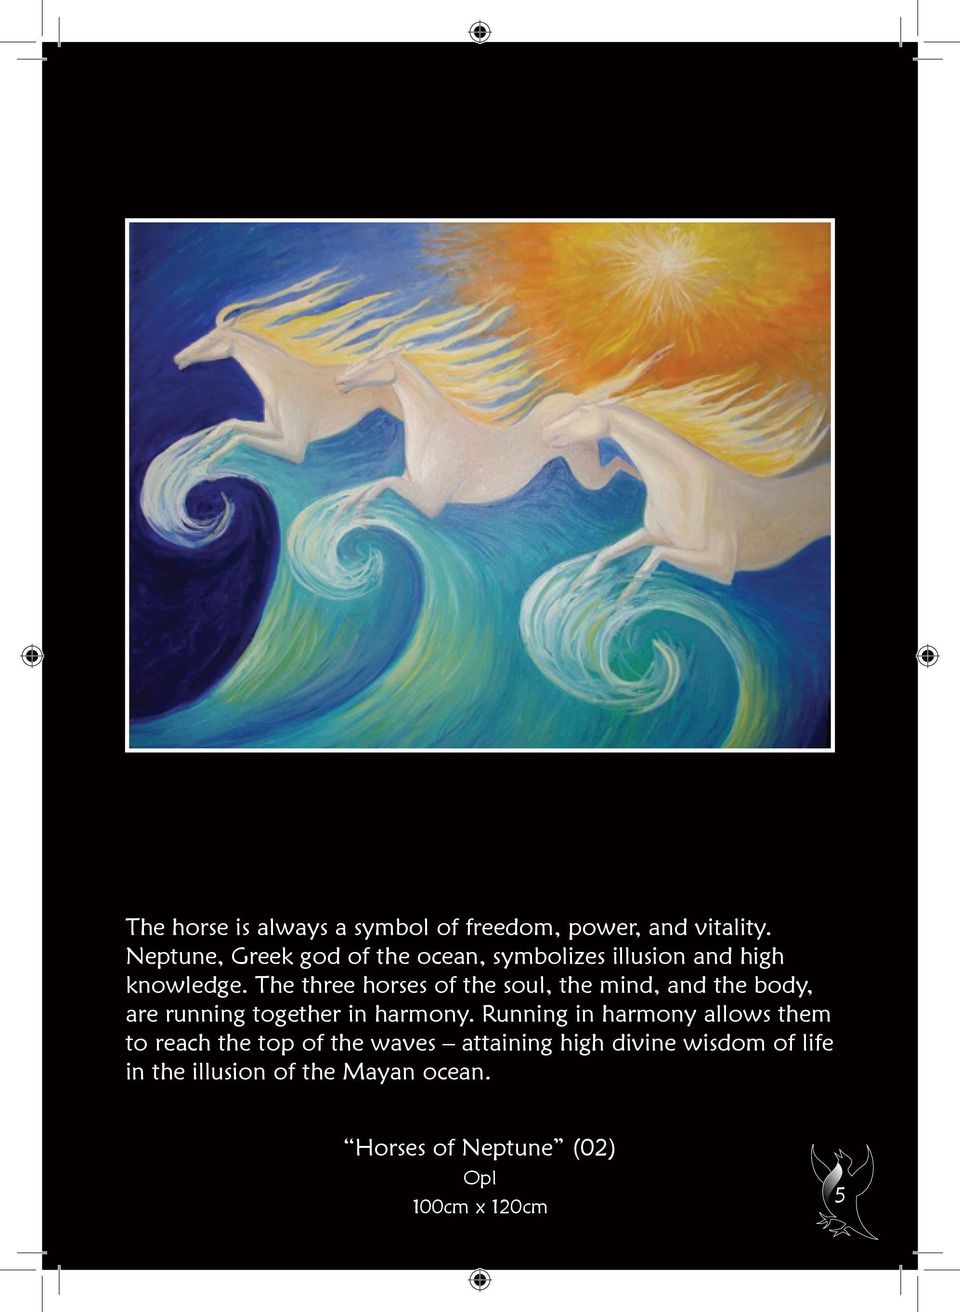 The three horses of the soul, the mind, and the body, are running together in harmony.